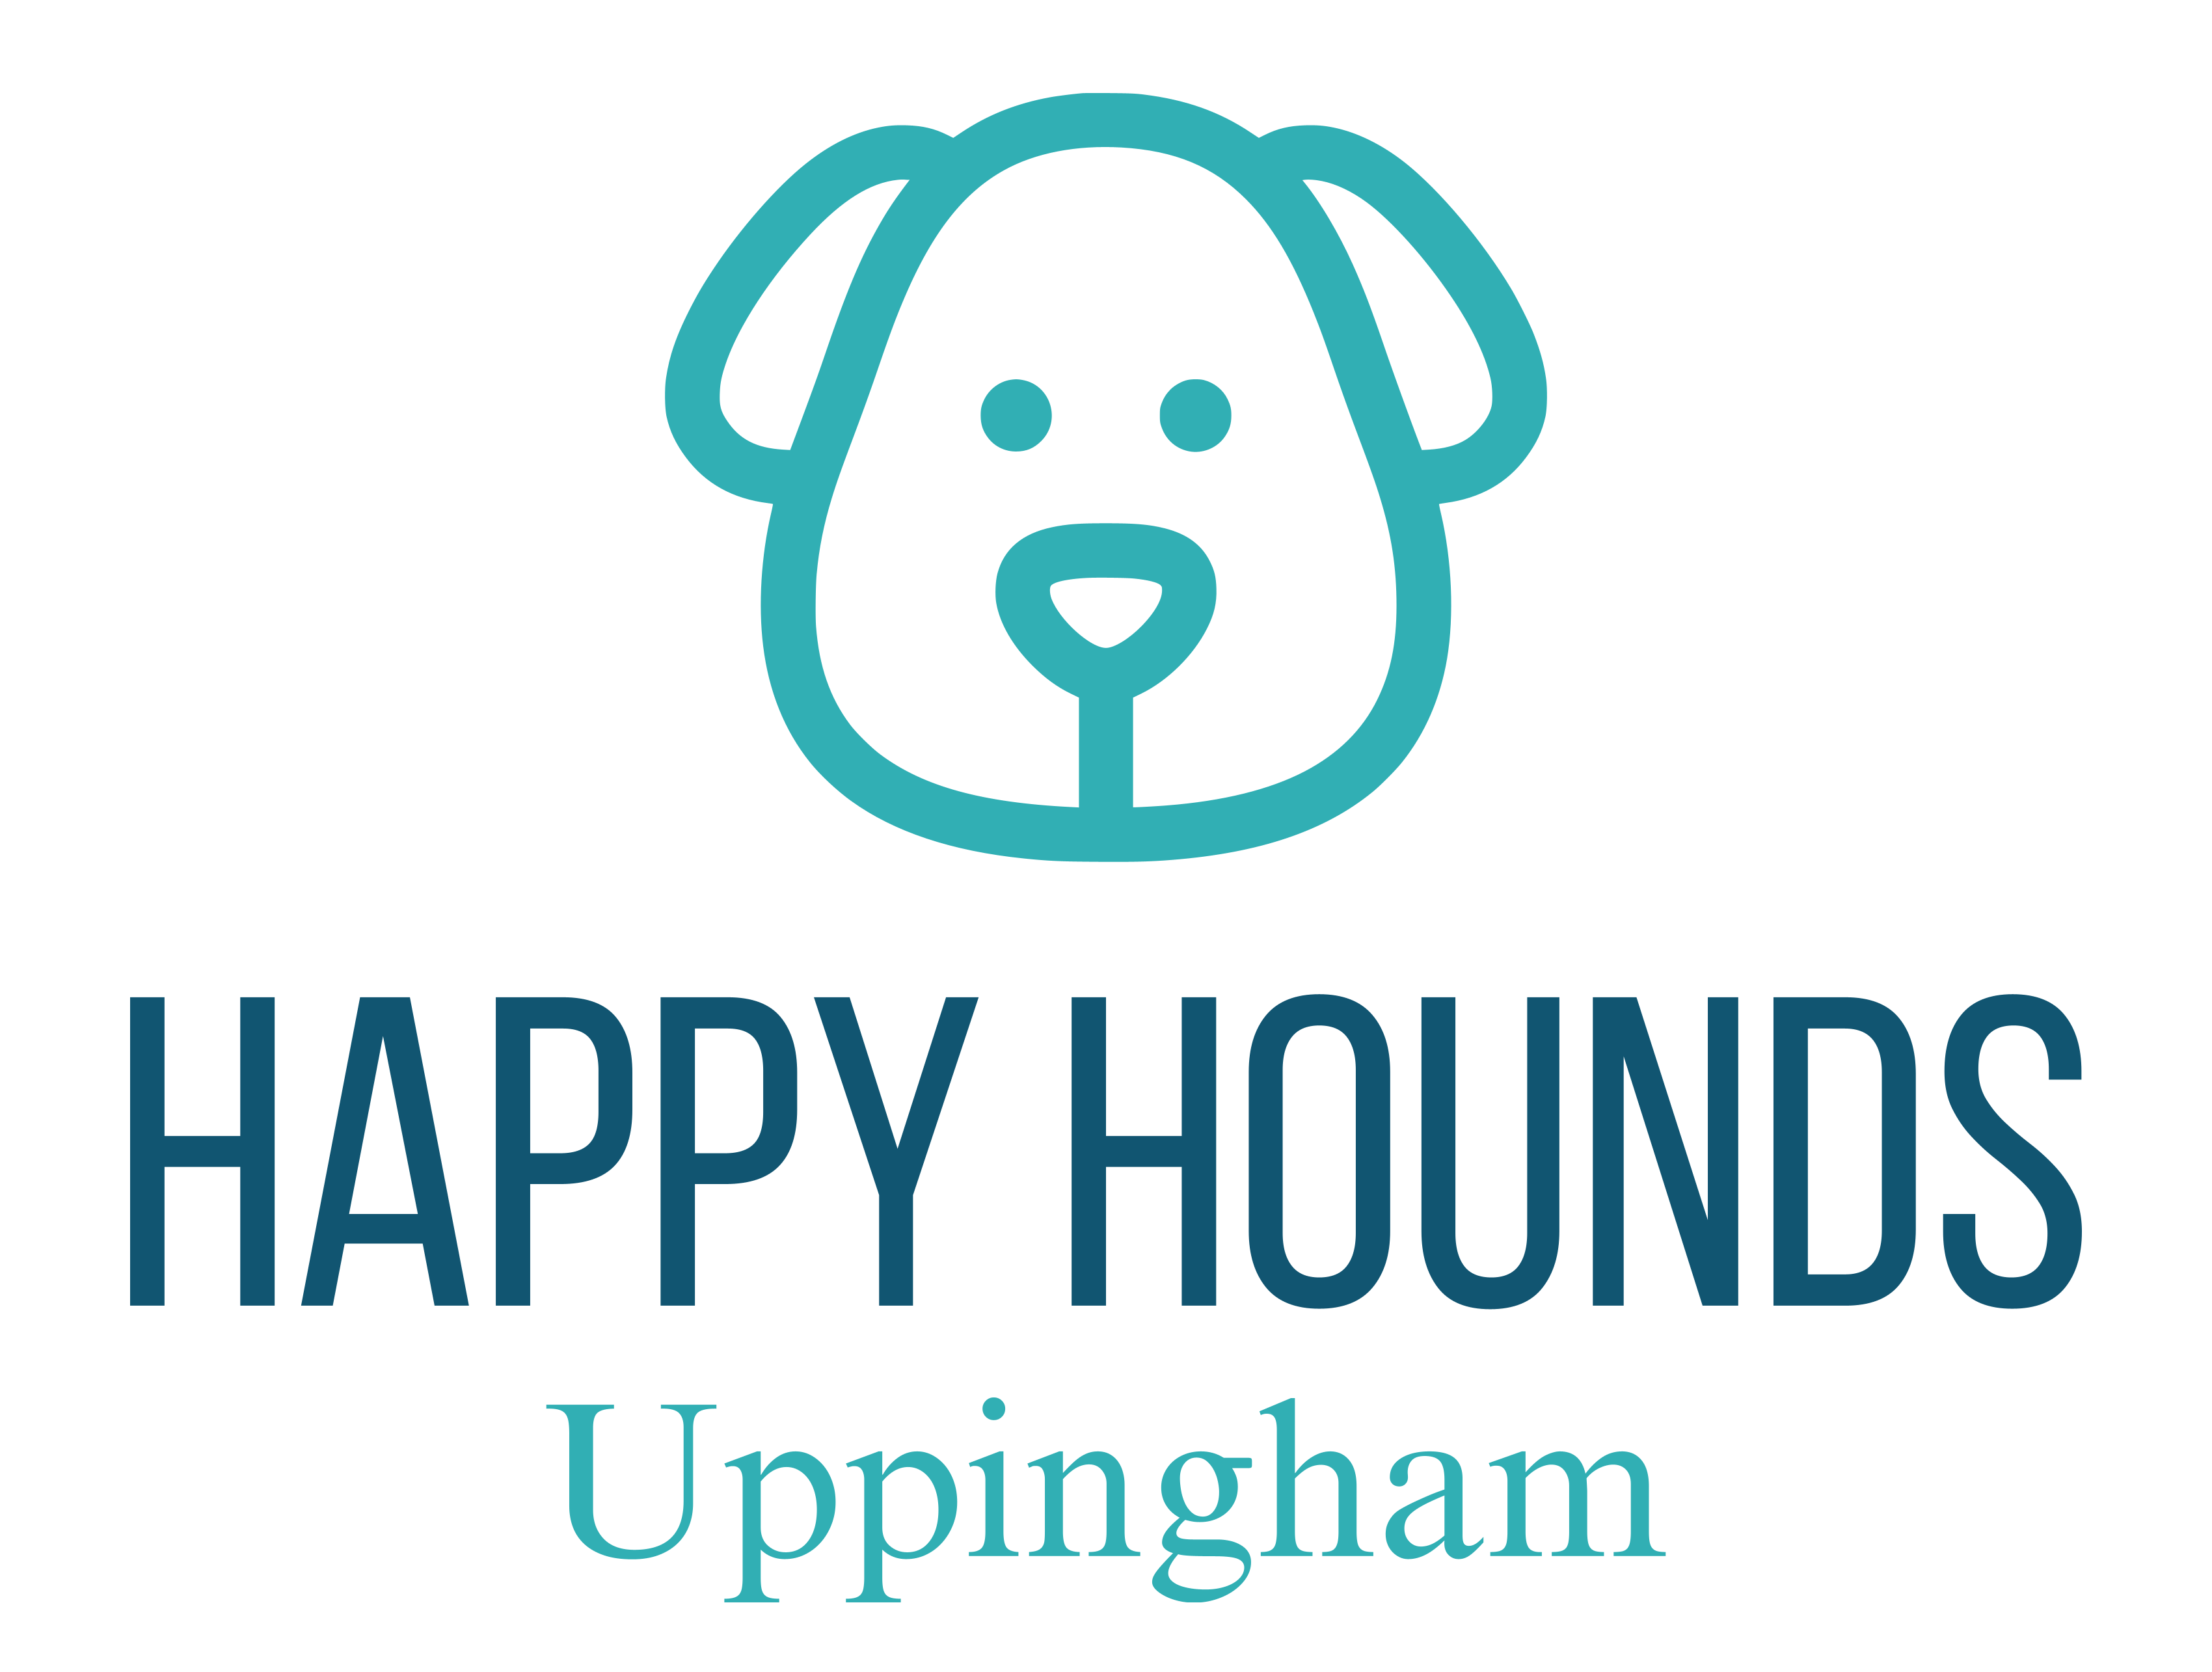 Happy Hounds Uppingham (Licence Number: 111838)